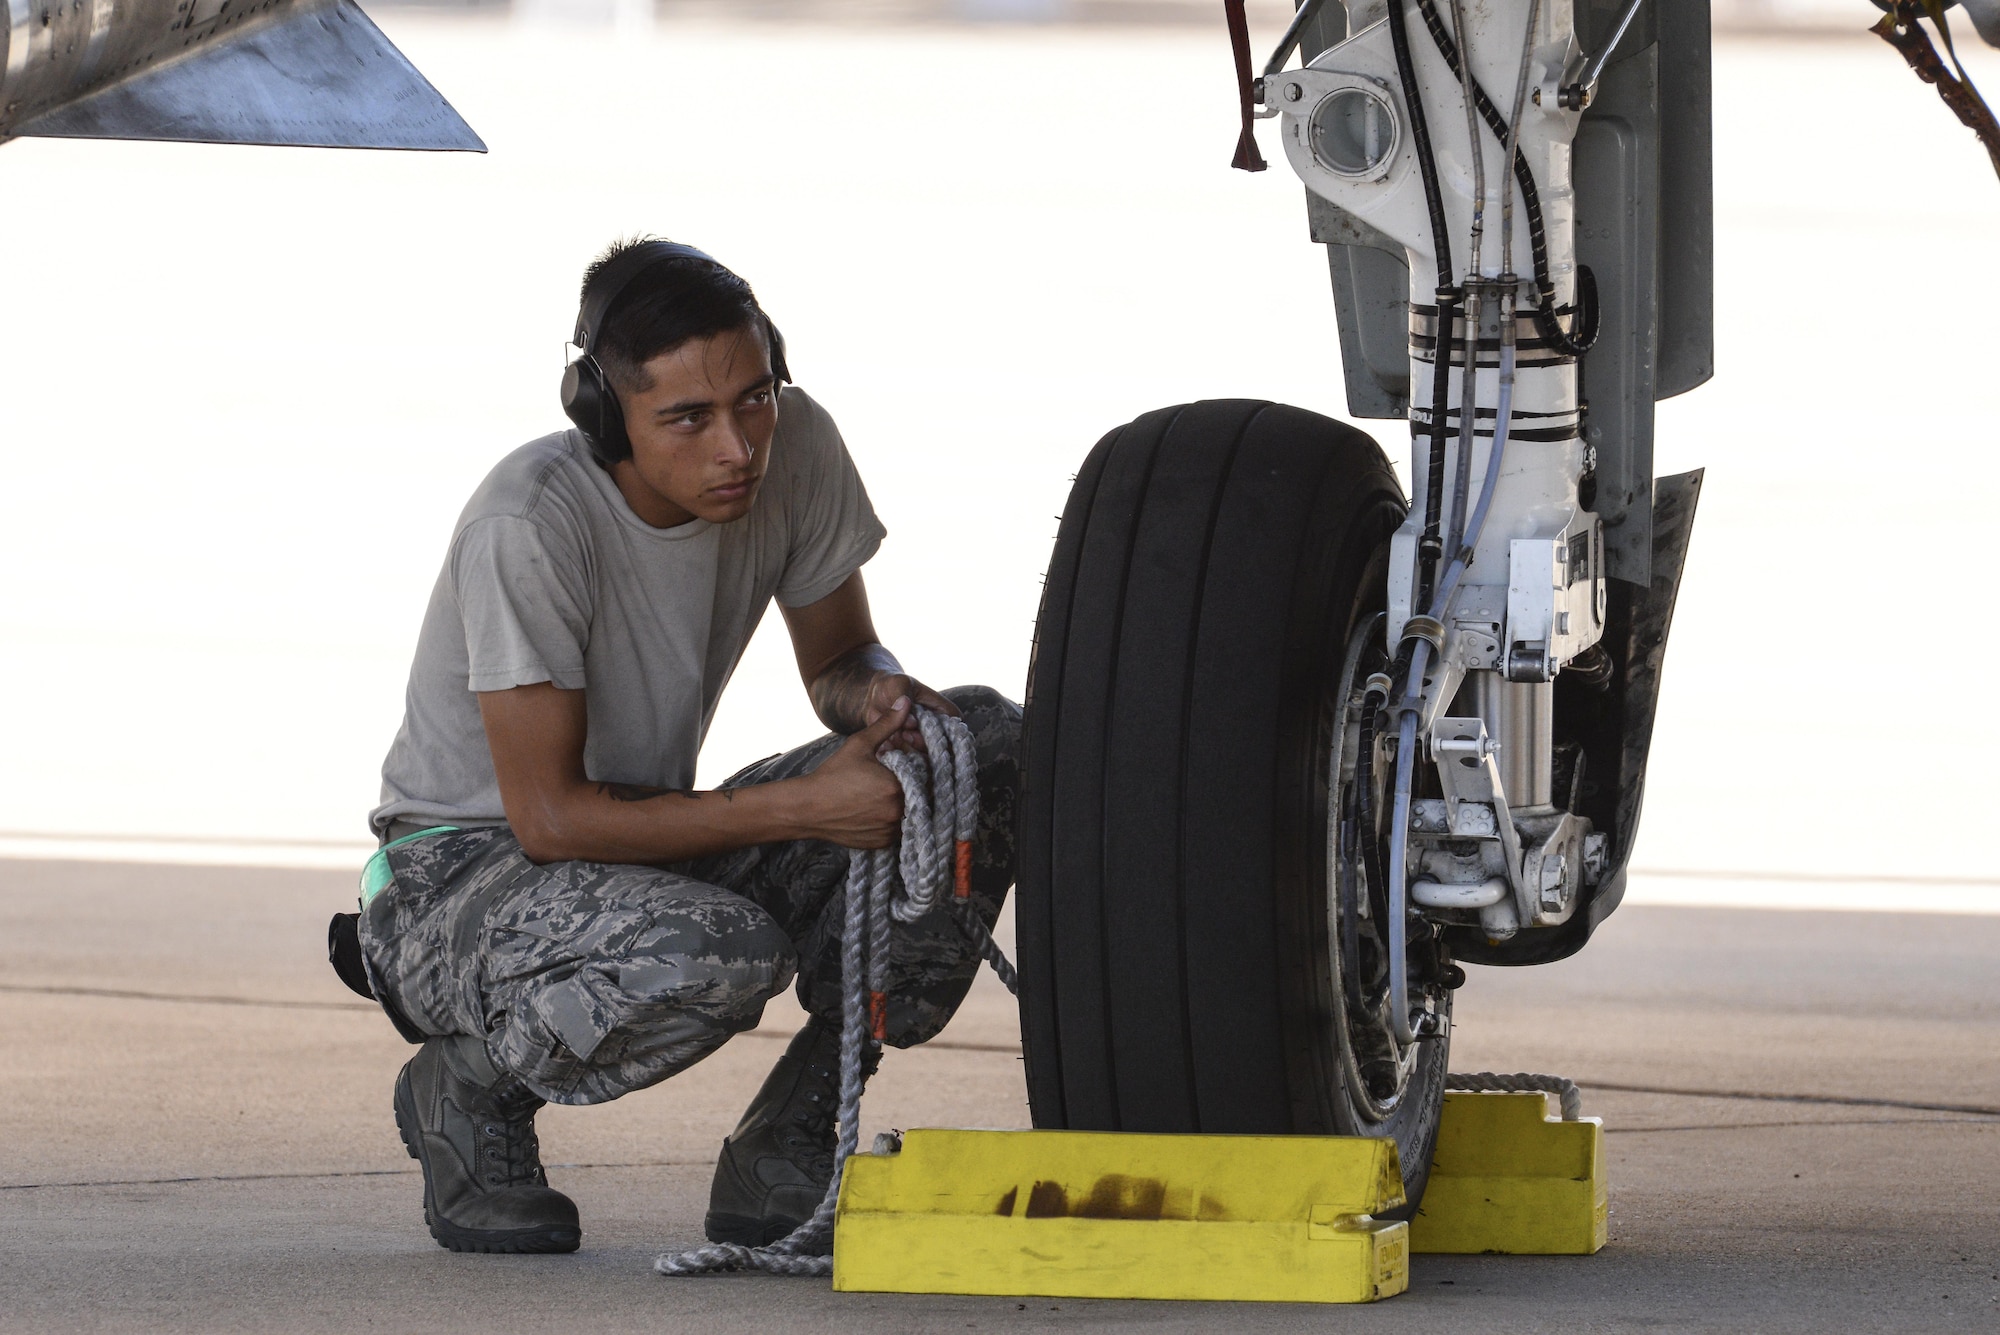 U.S. Air Force Senior Airman Julio España, 355th Aircraft Maintenance Squadron A-10C Thunderbolt II crew chief, waits to release pull chocks for an A-10 at Davis-Monthan Air Force Base, Ariz., July 14, 2017. The first production model of the A-10, the A-10A, was delivered to D-M AFB in Oct. 1975 and the A-10C arrived in Sept. 2007. (U.S. Air Force photo by Senior Airman Mya M. Crosby)